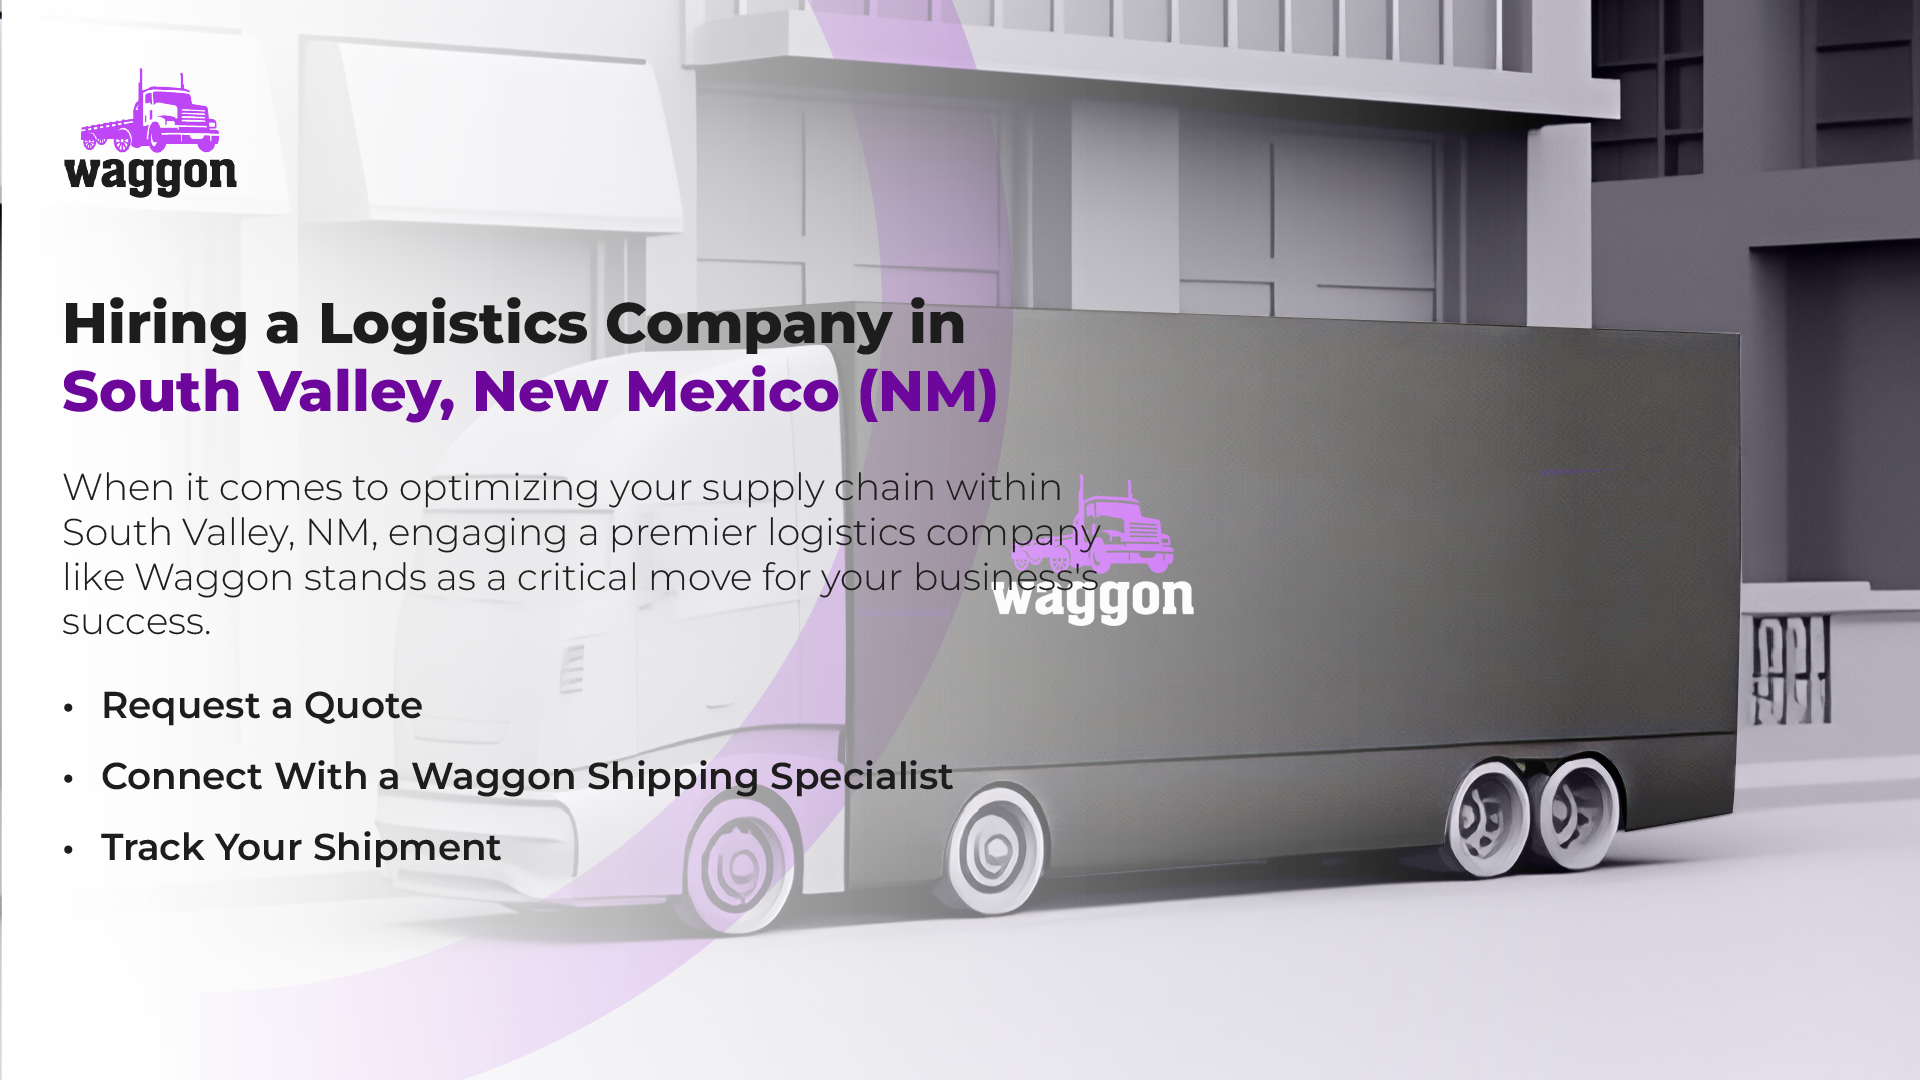 Hiring A Logistics Company in South Valley, New Mexico (NM)